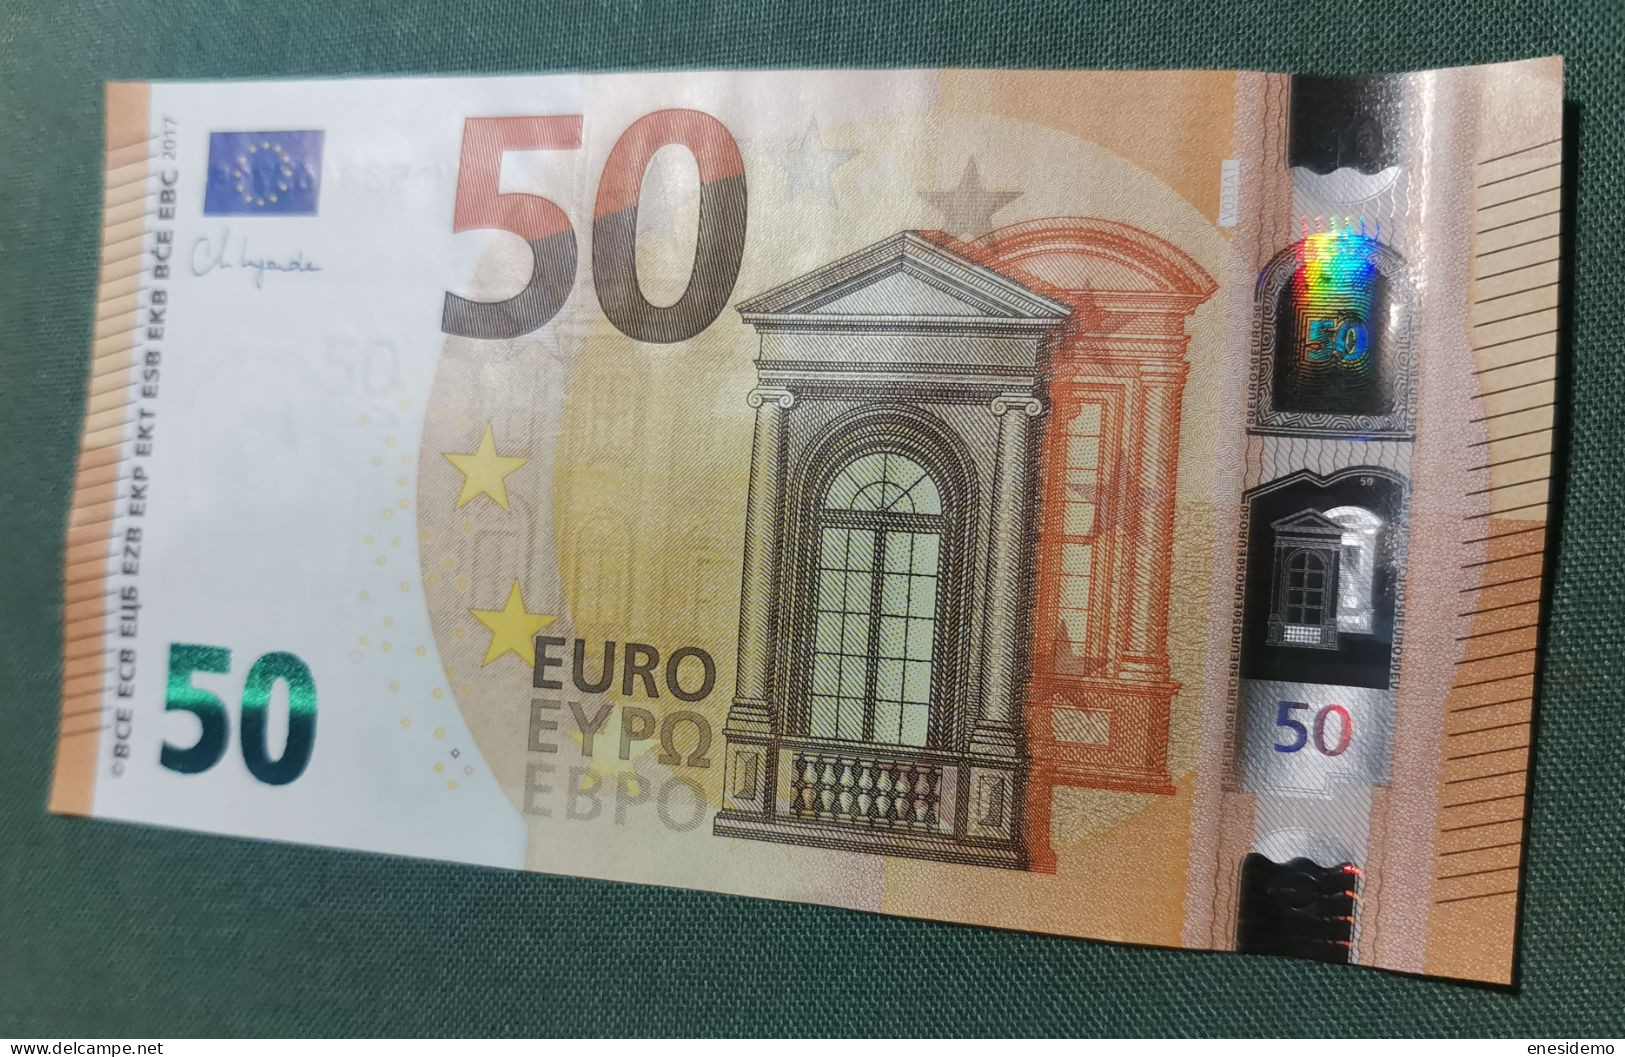 50 EURO SPAIN 2017 LAGARDE V033A1 VD SC FDS UNCIRCULATED PERFECT - 50 Euro